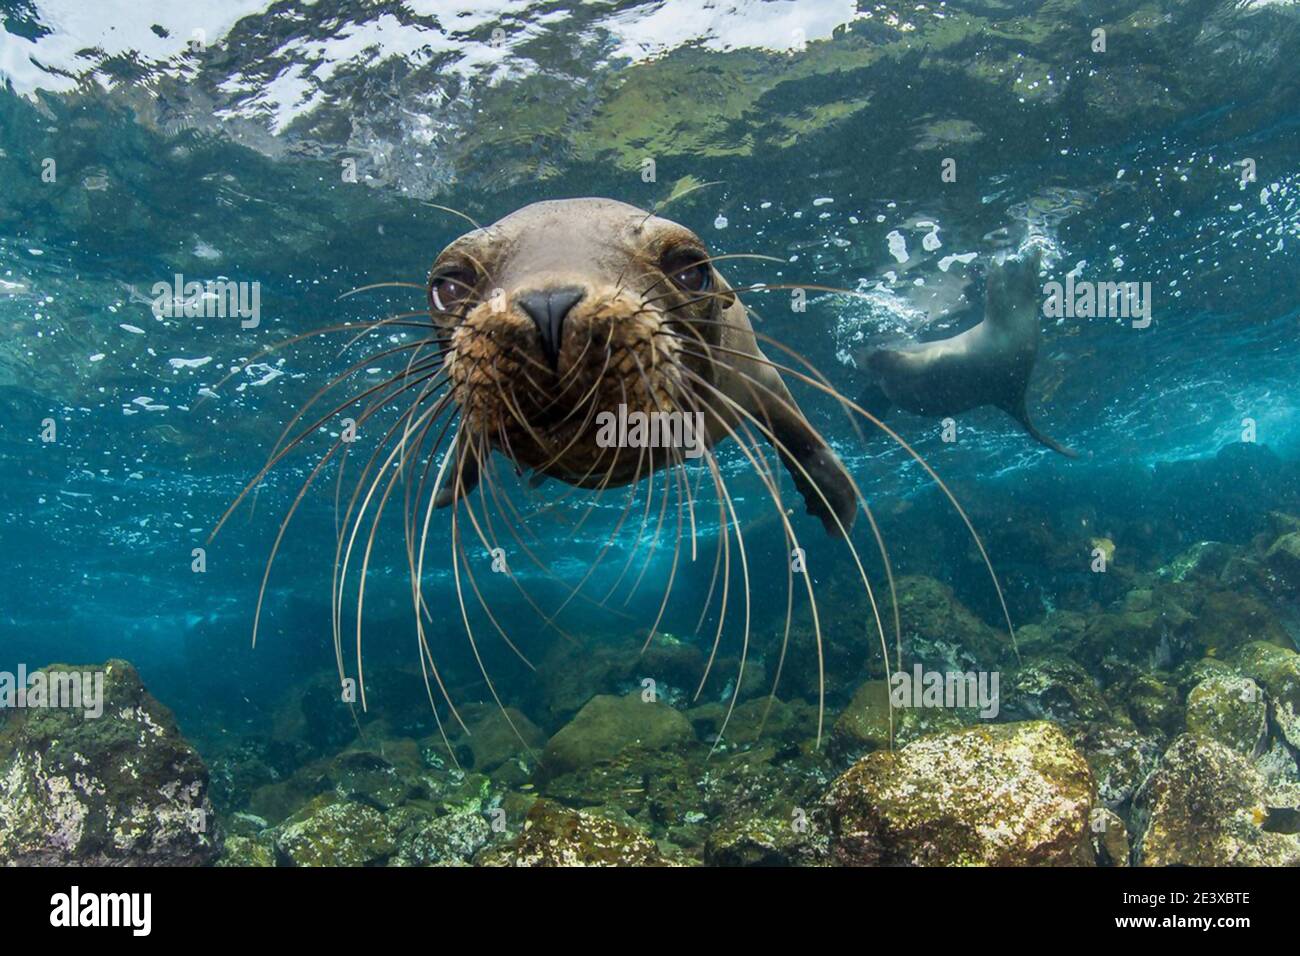 C E O High Resolution Stock Photography and Images - Alamy